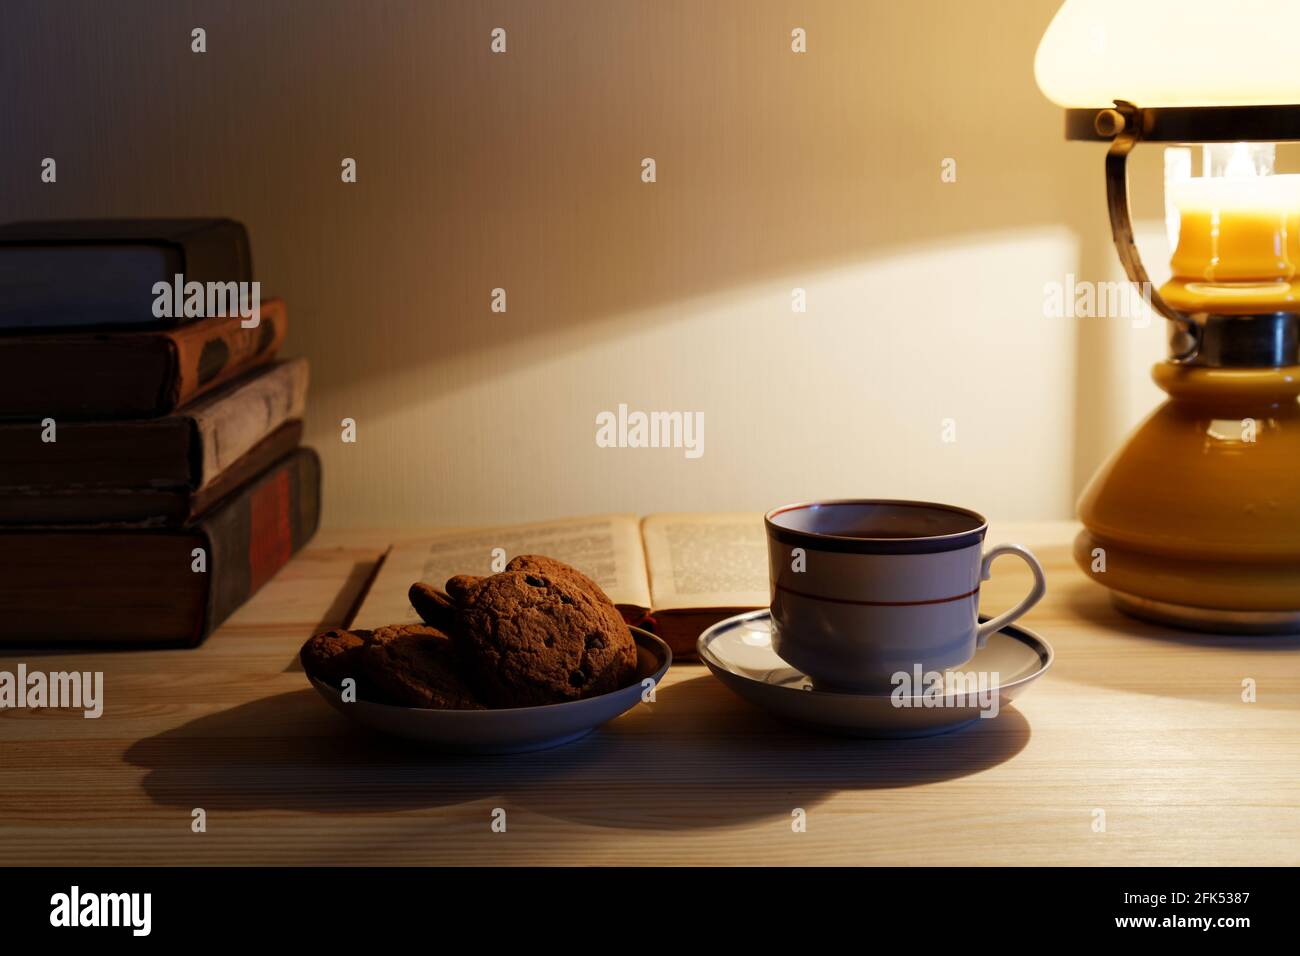 Cup of tea and stack of old books on the table with warm lighting lamp Stock Photo